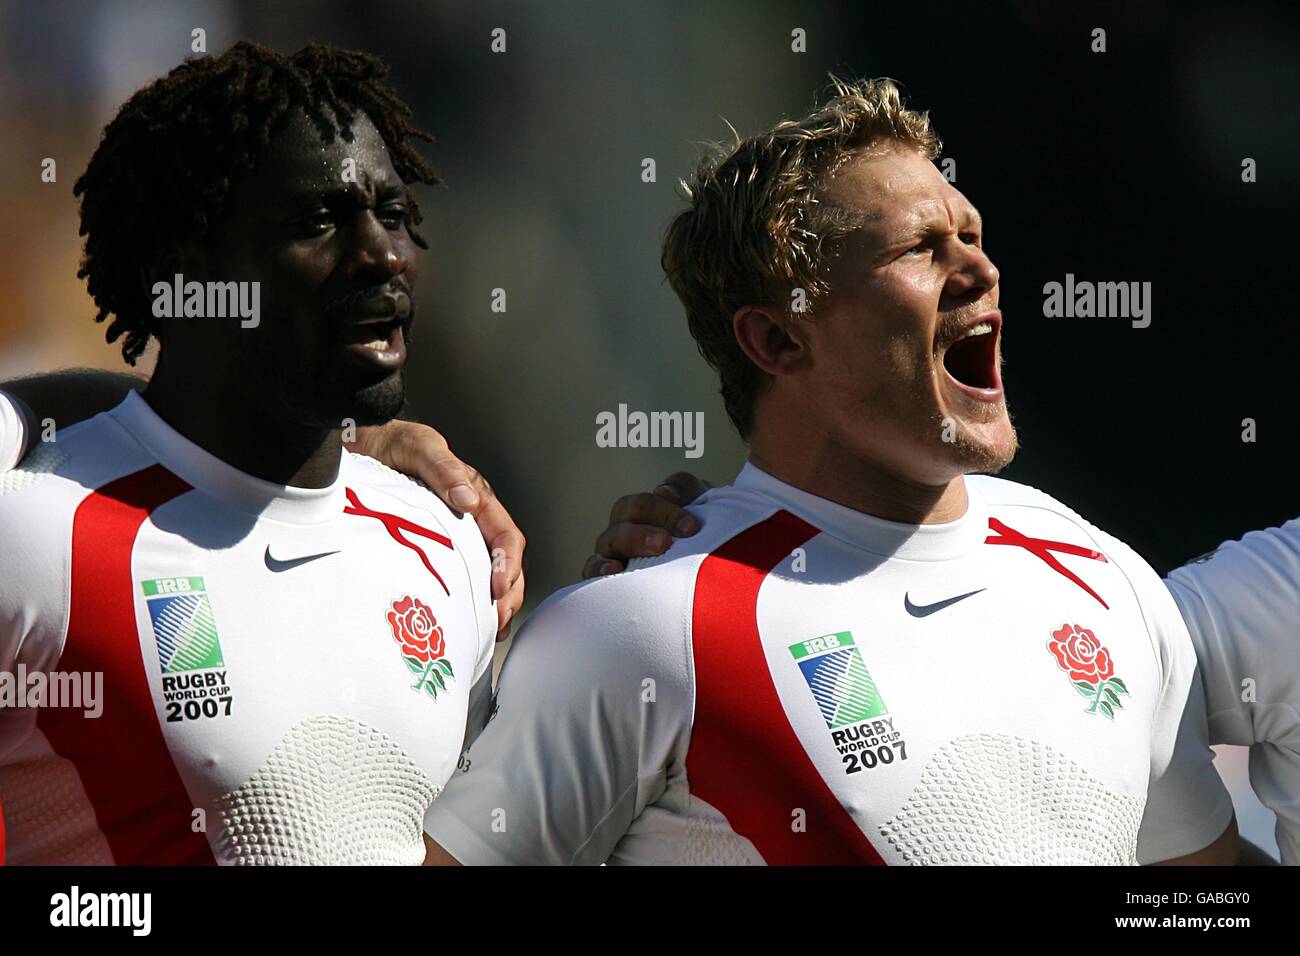 Rugby Union - IRB Rugby World Cup 2007 - Quarter Final - Australia v England - Stade Velodrome. England's Josh Lewsy (r) and Paul Sackey during the national anthem Stock Photo